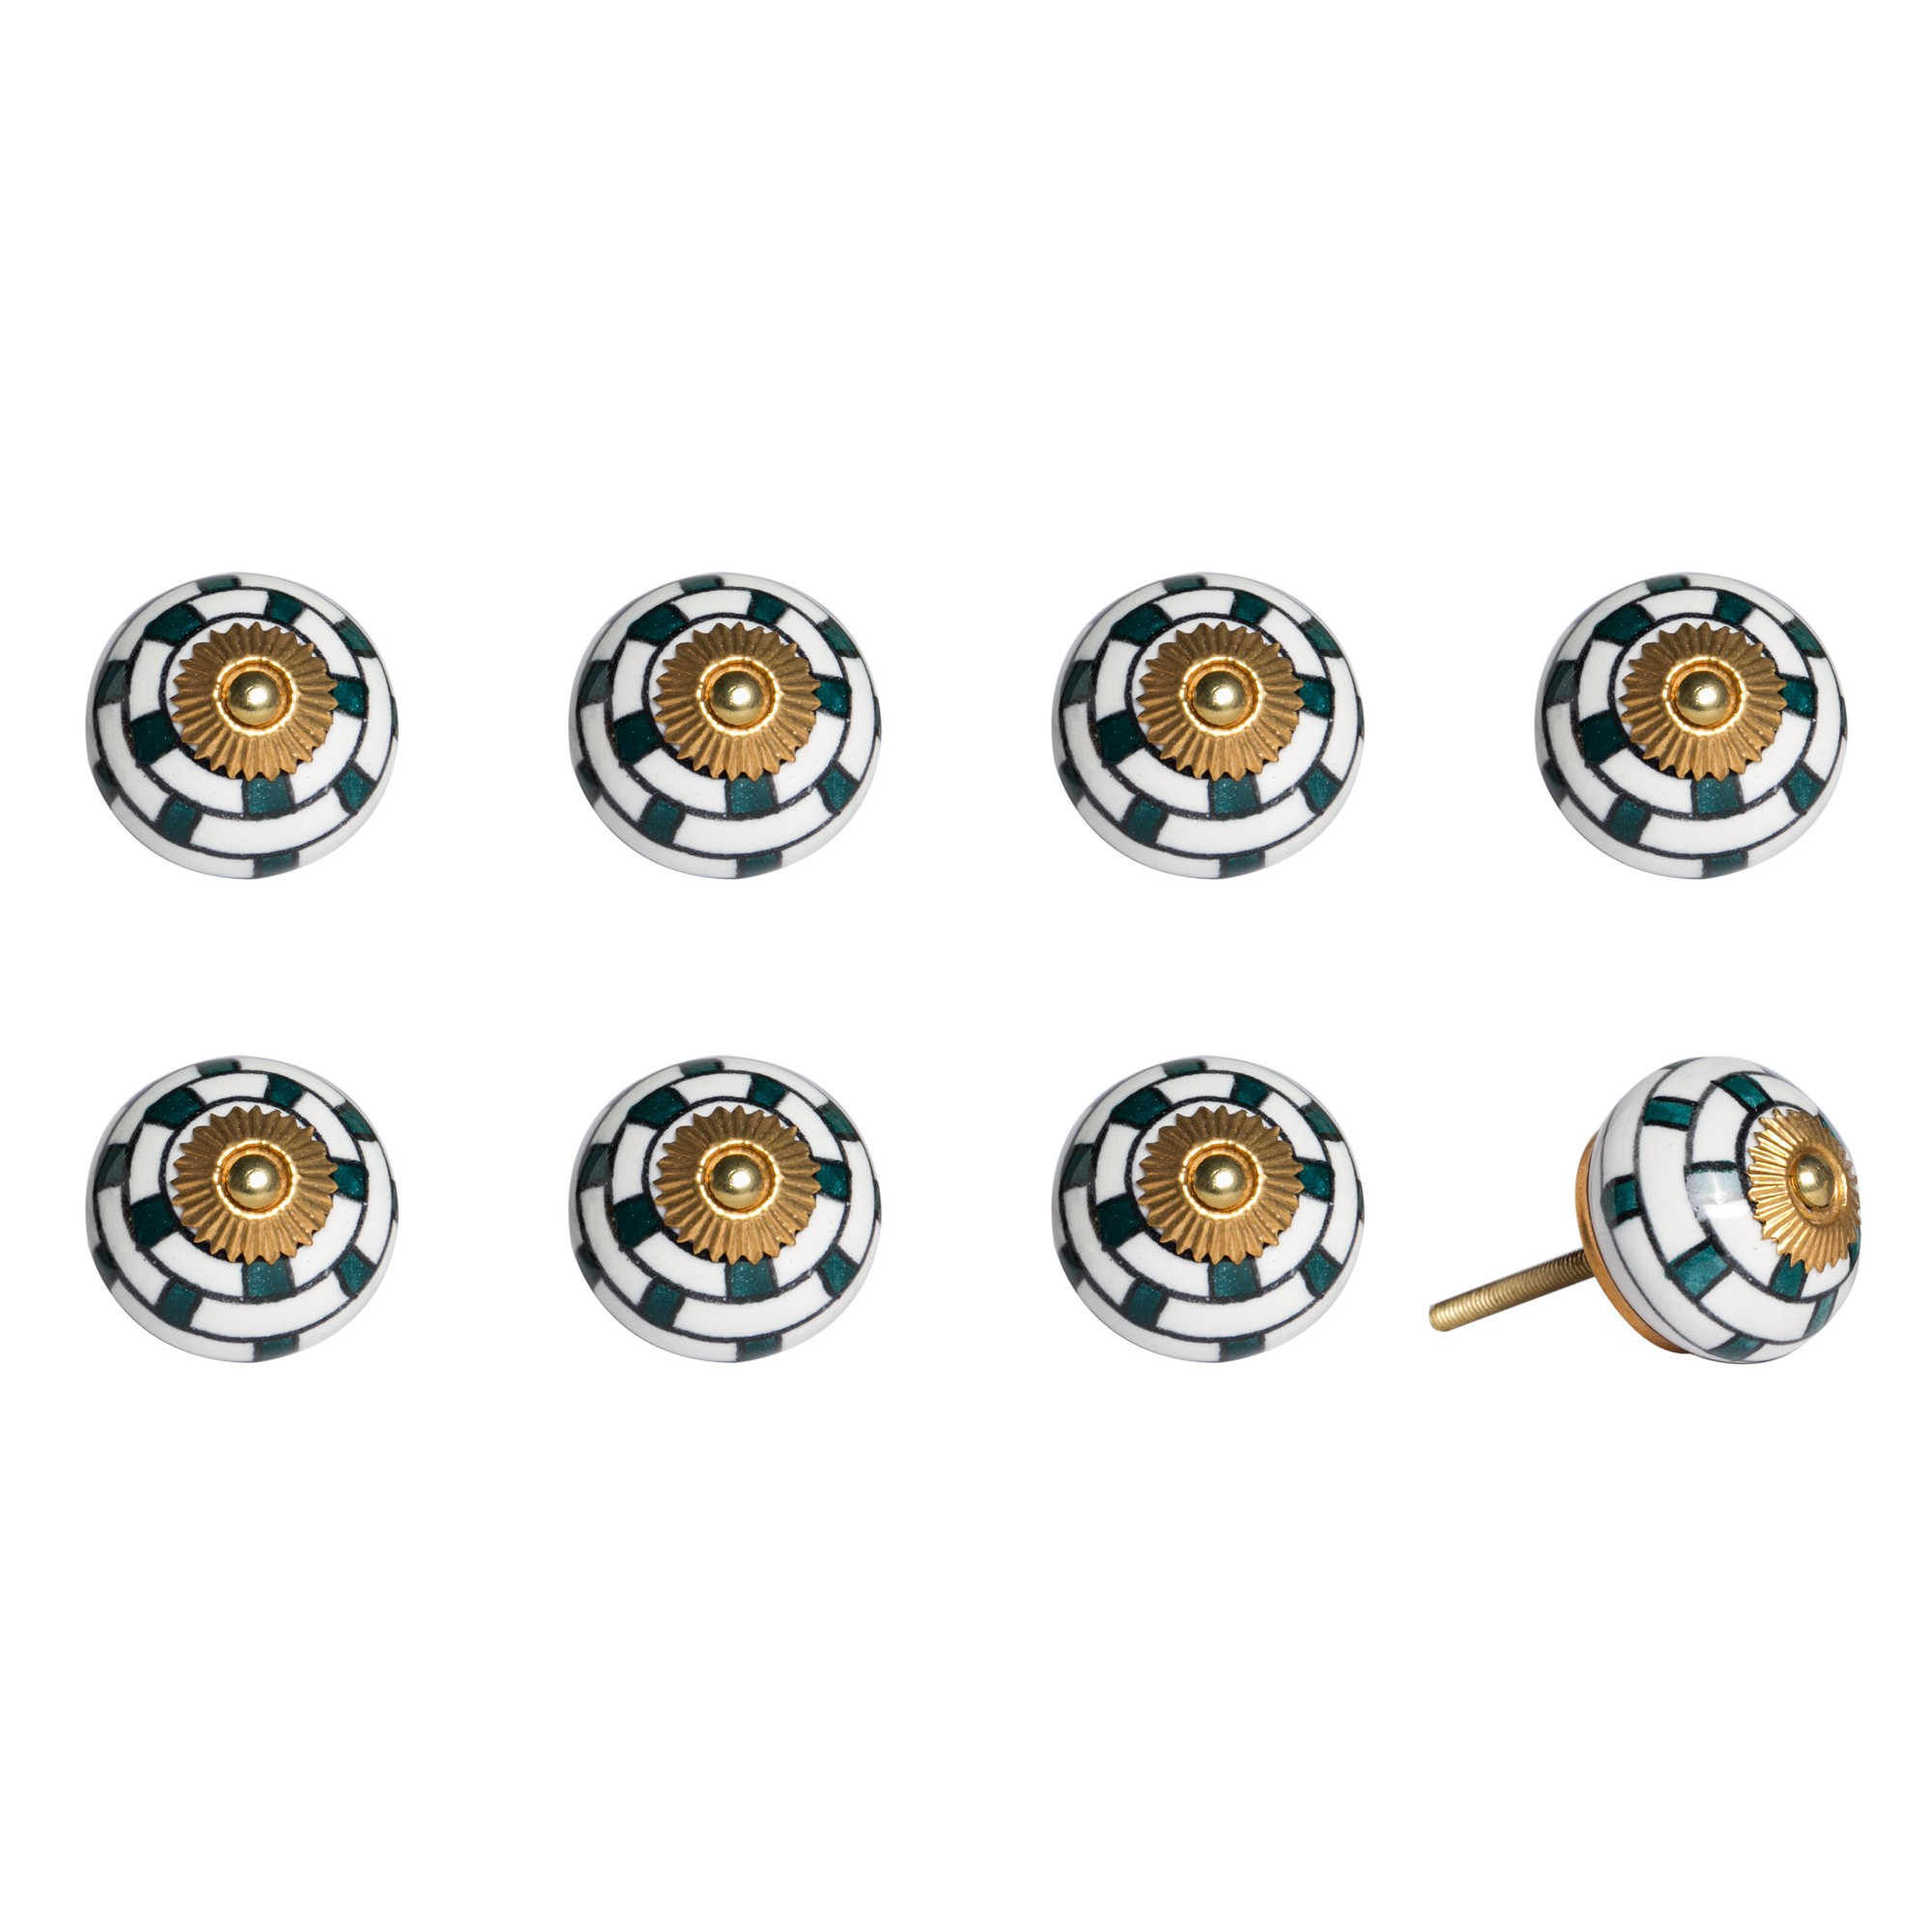 1.5" x 1.5" x 1.5" Green, White And Gold - Knobs 8-Pack